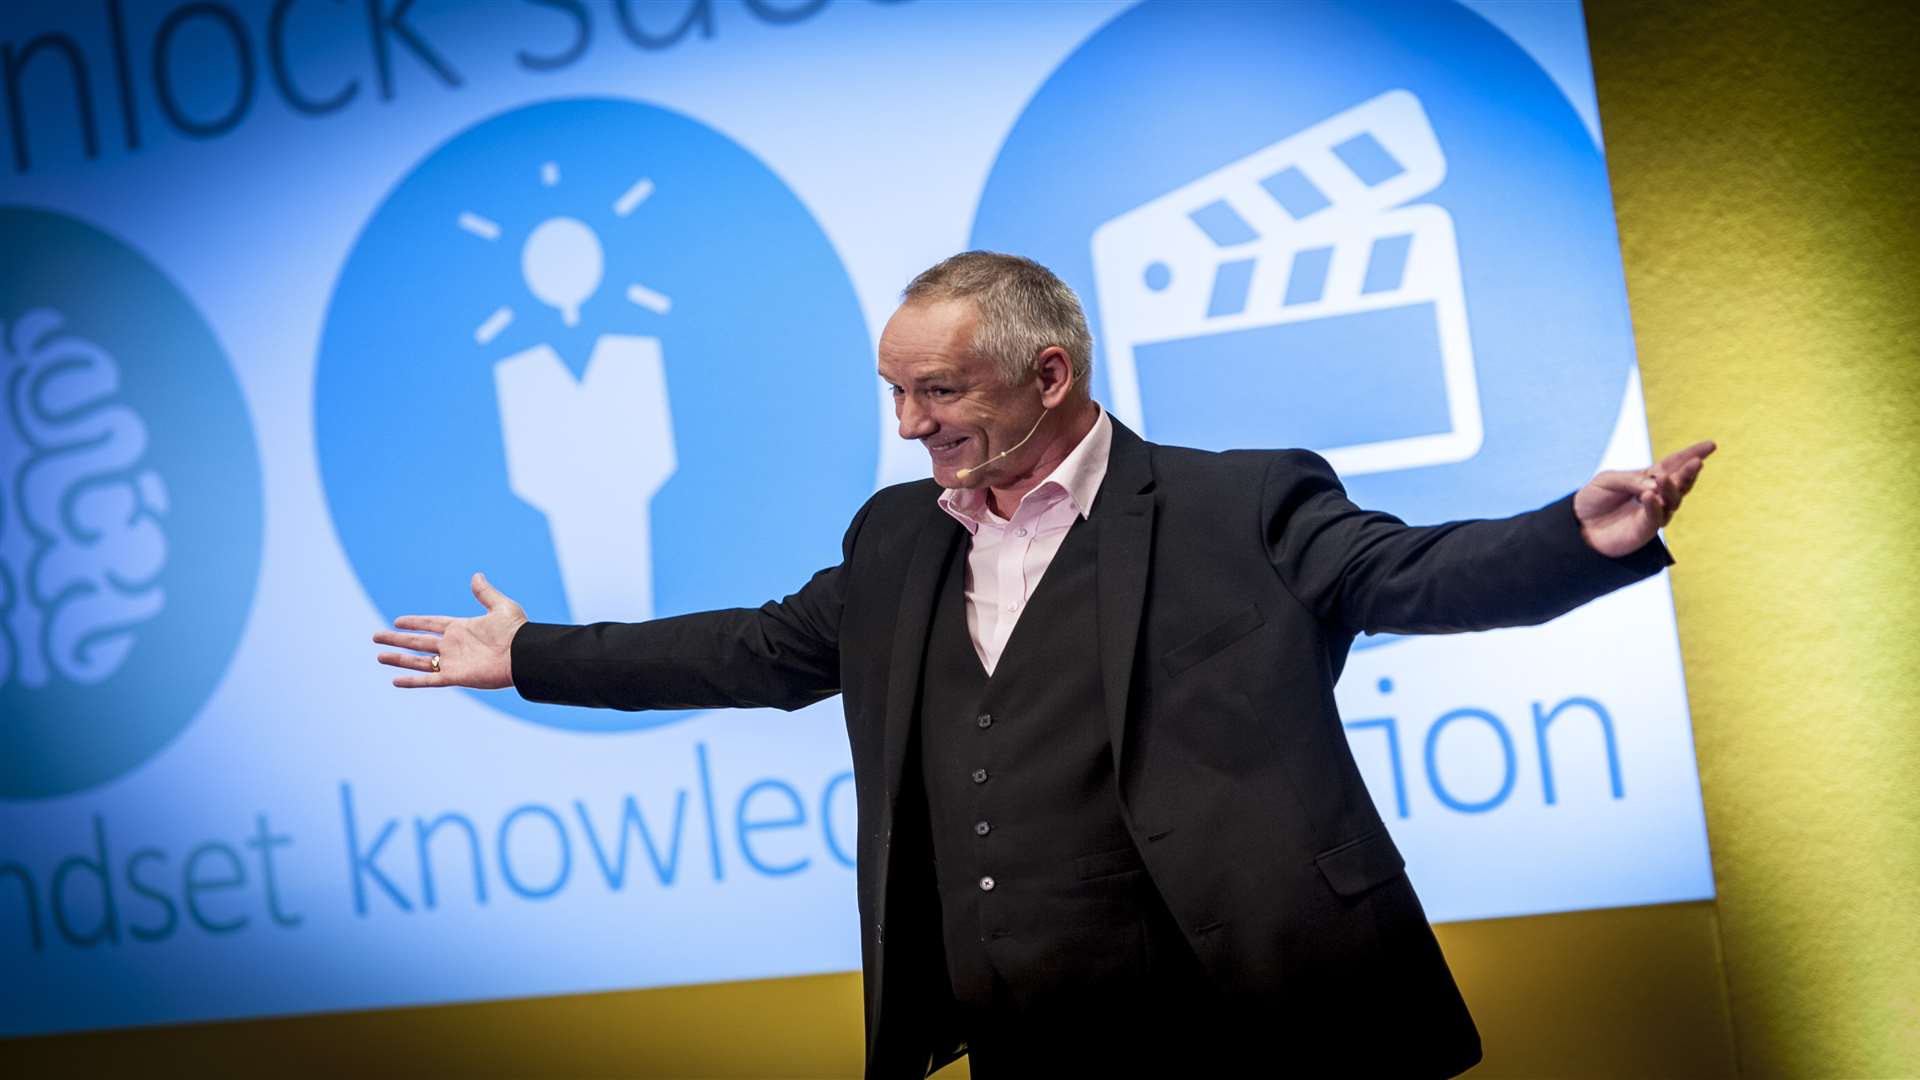 Business coach Ian Dickson has given more than 250 seminars and speeches in his career